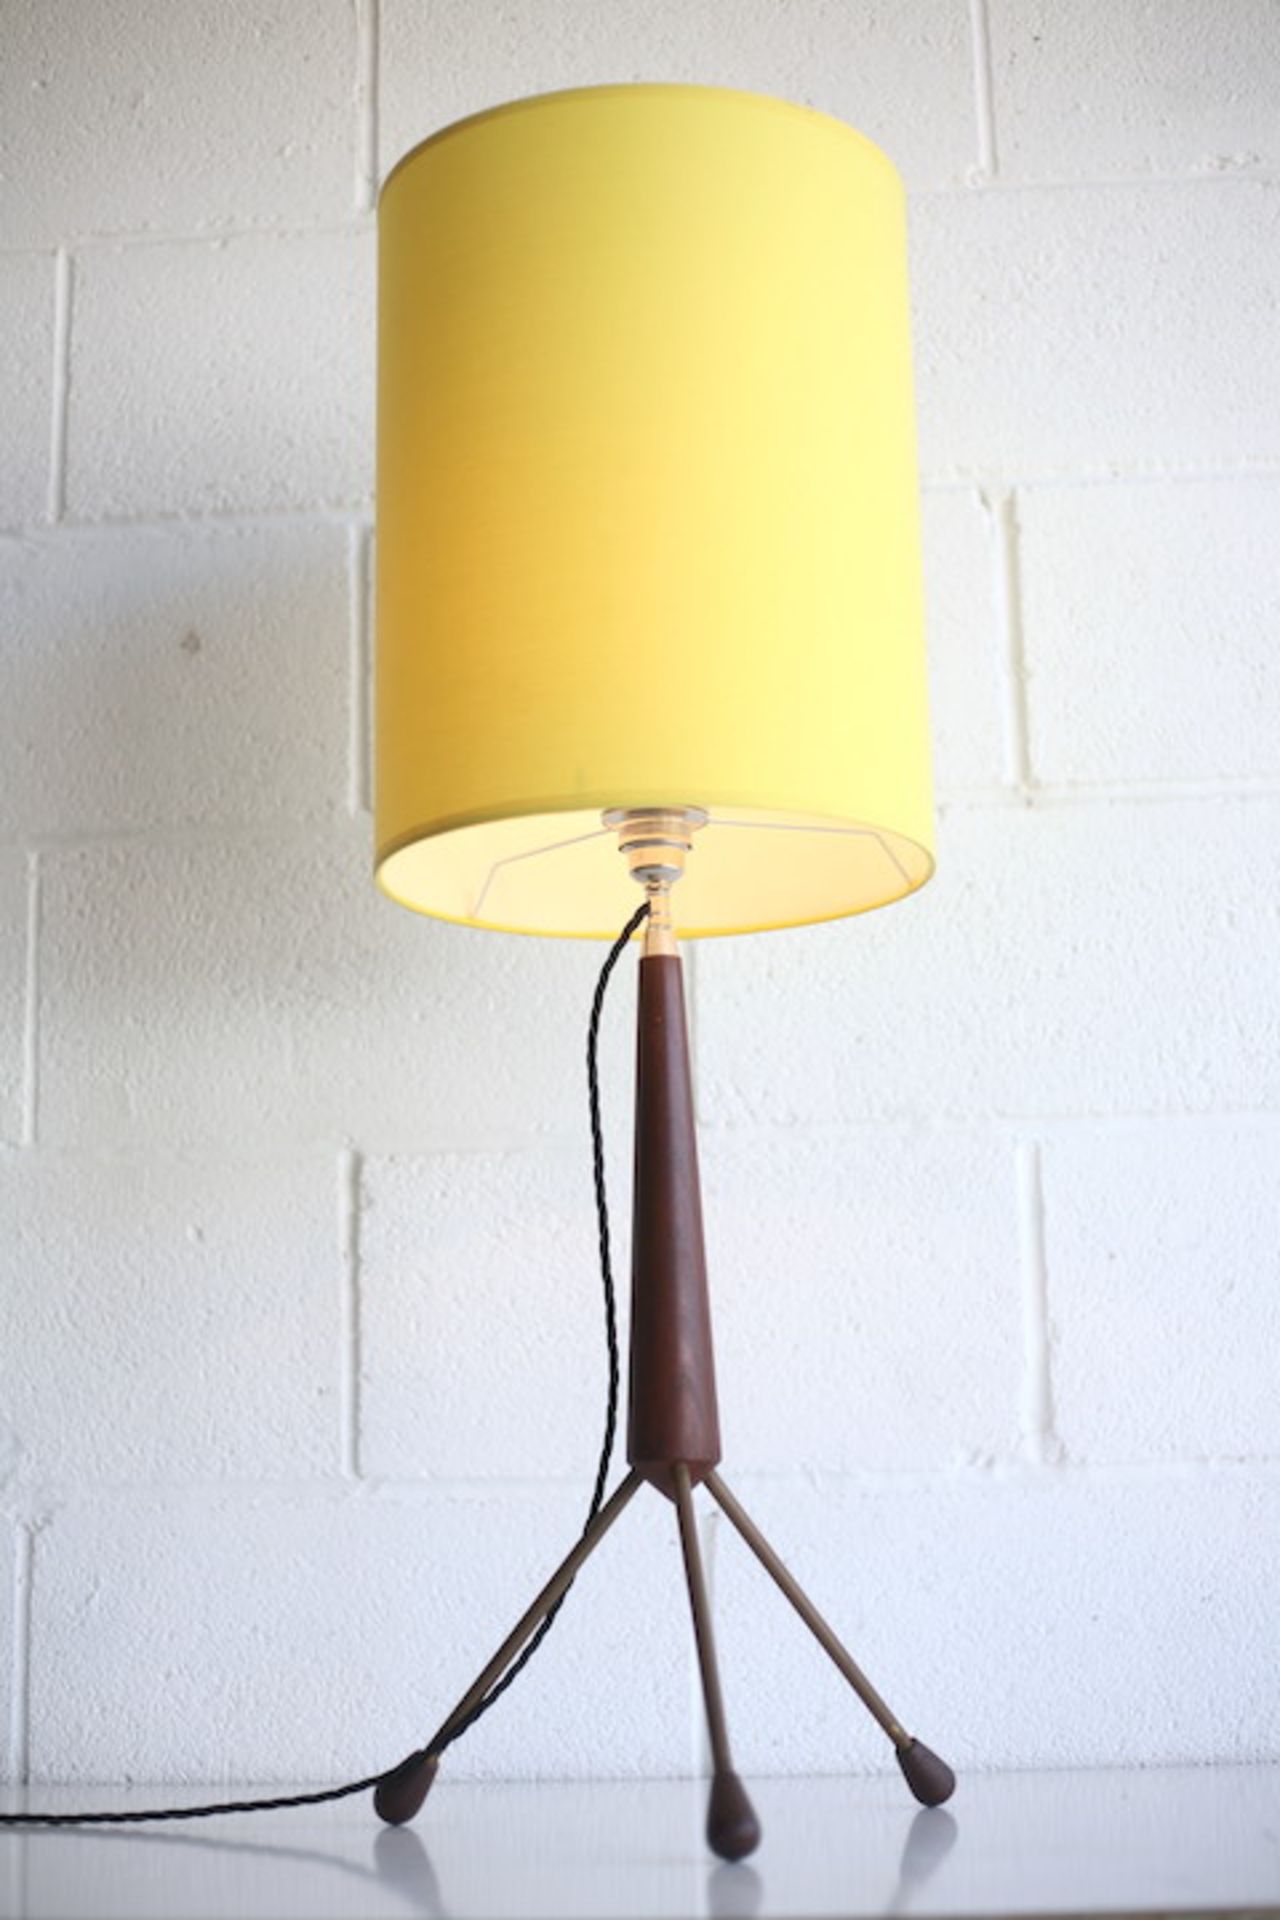 20TH CENTURY 1960s TEAK AND BRASS TRIPOD TABLE LAMP - Image 5 of 5